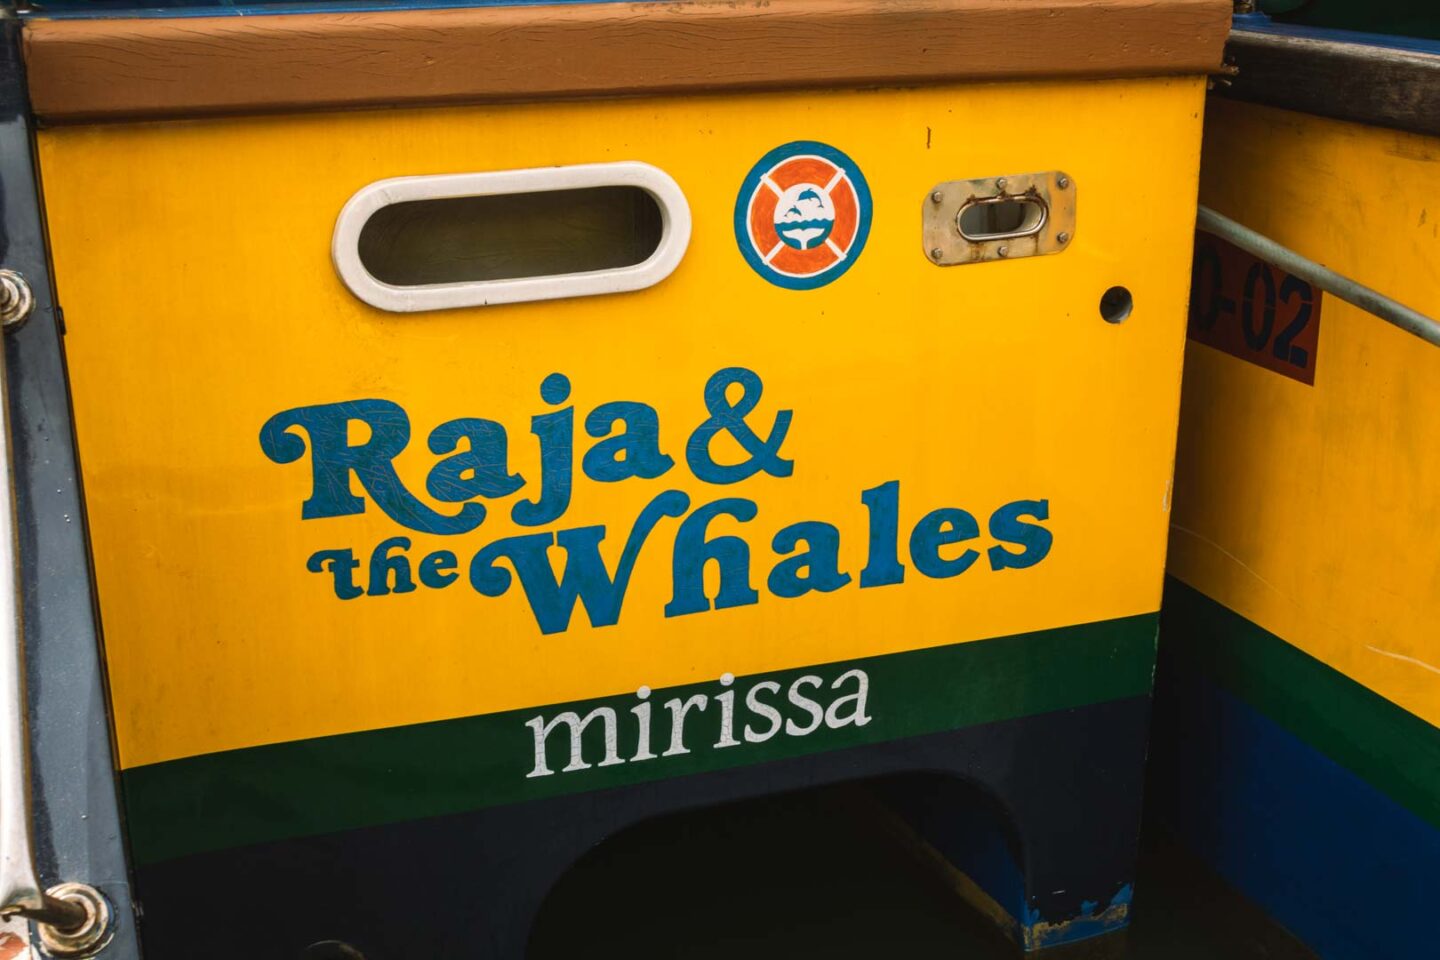 Raja & the Whales whale watching tour company in Mirissa